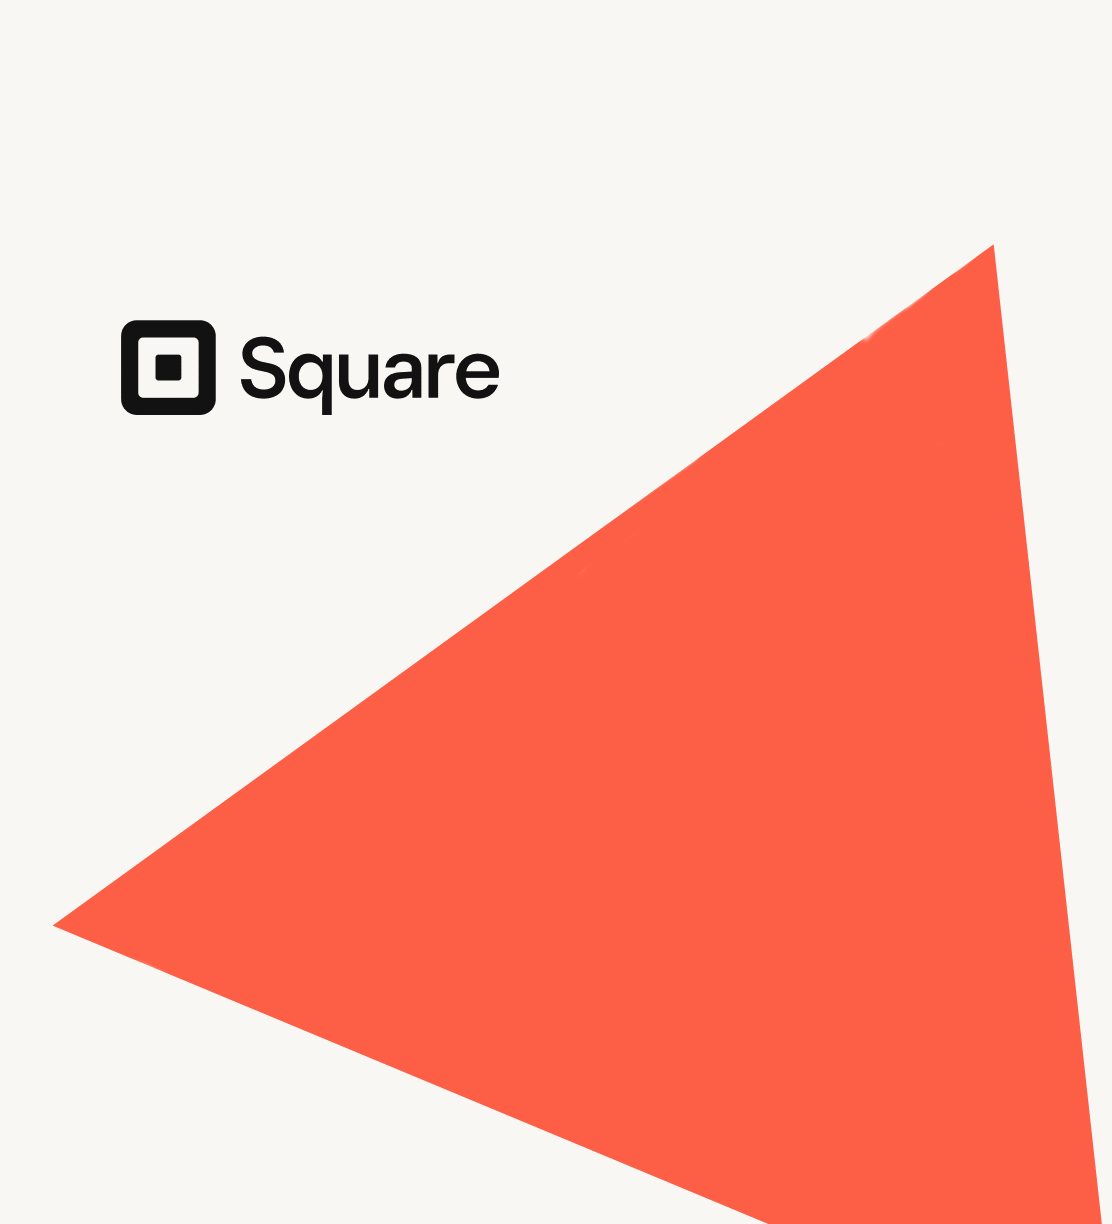 Square powers commerce on data + AI